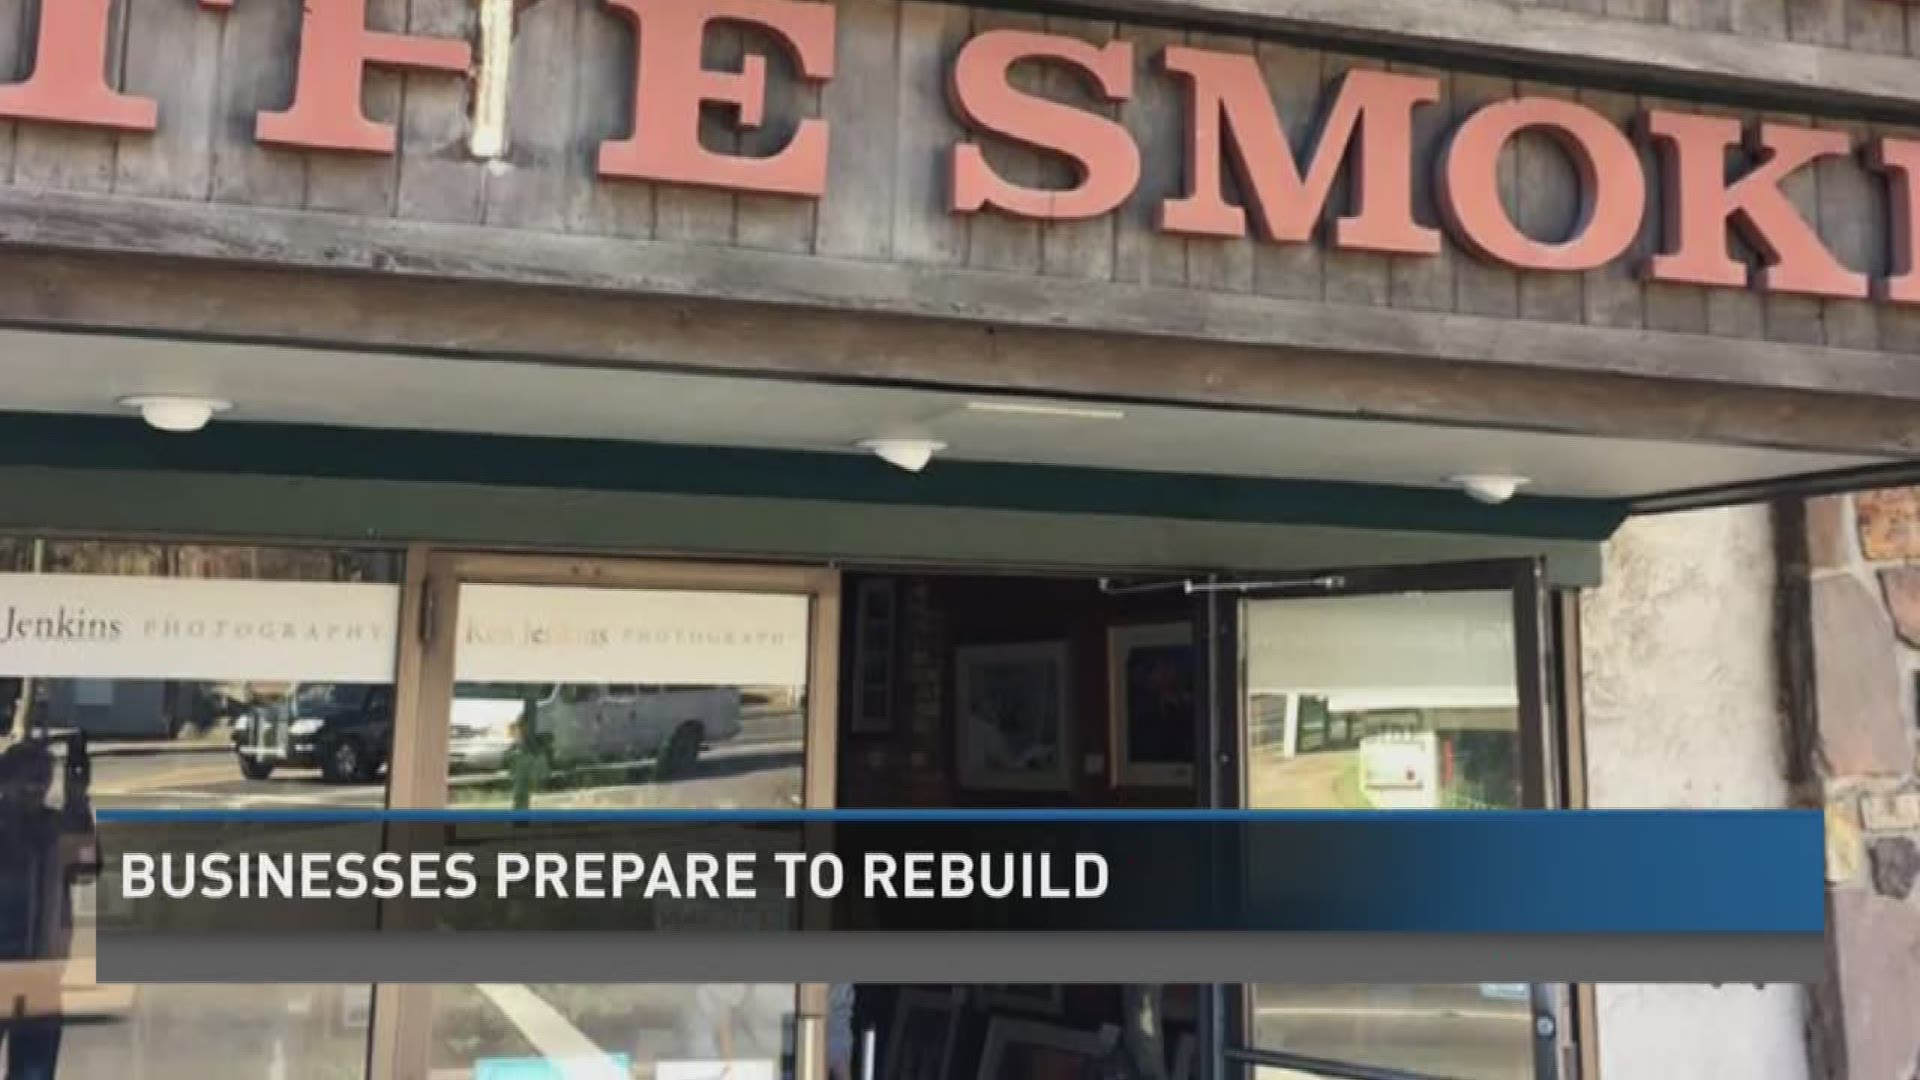 After losing their businesses, Sevier County businesses are preparing to rebuild for the day their companies, and the people that support them, can return. 